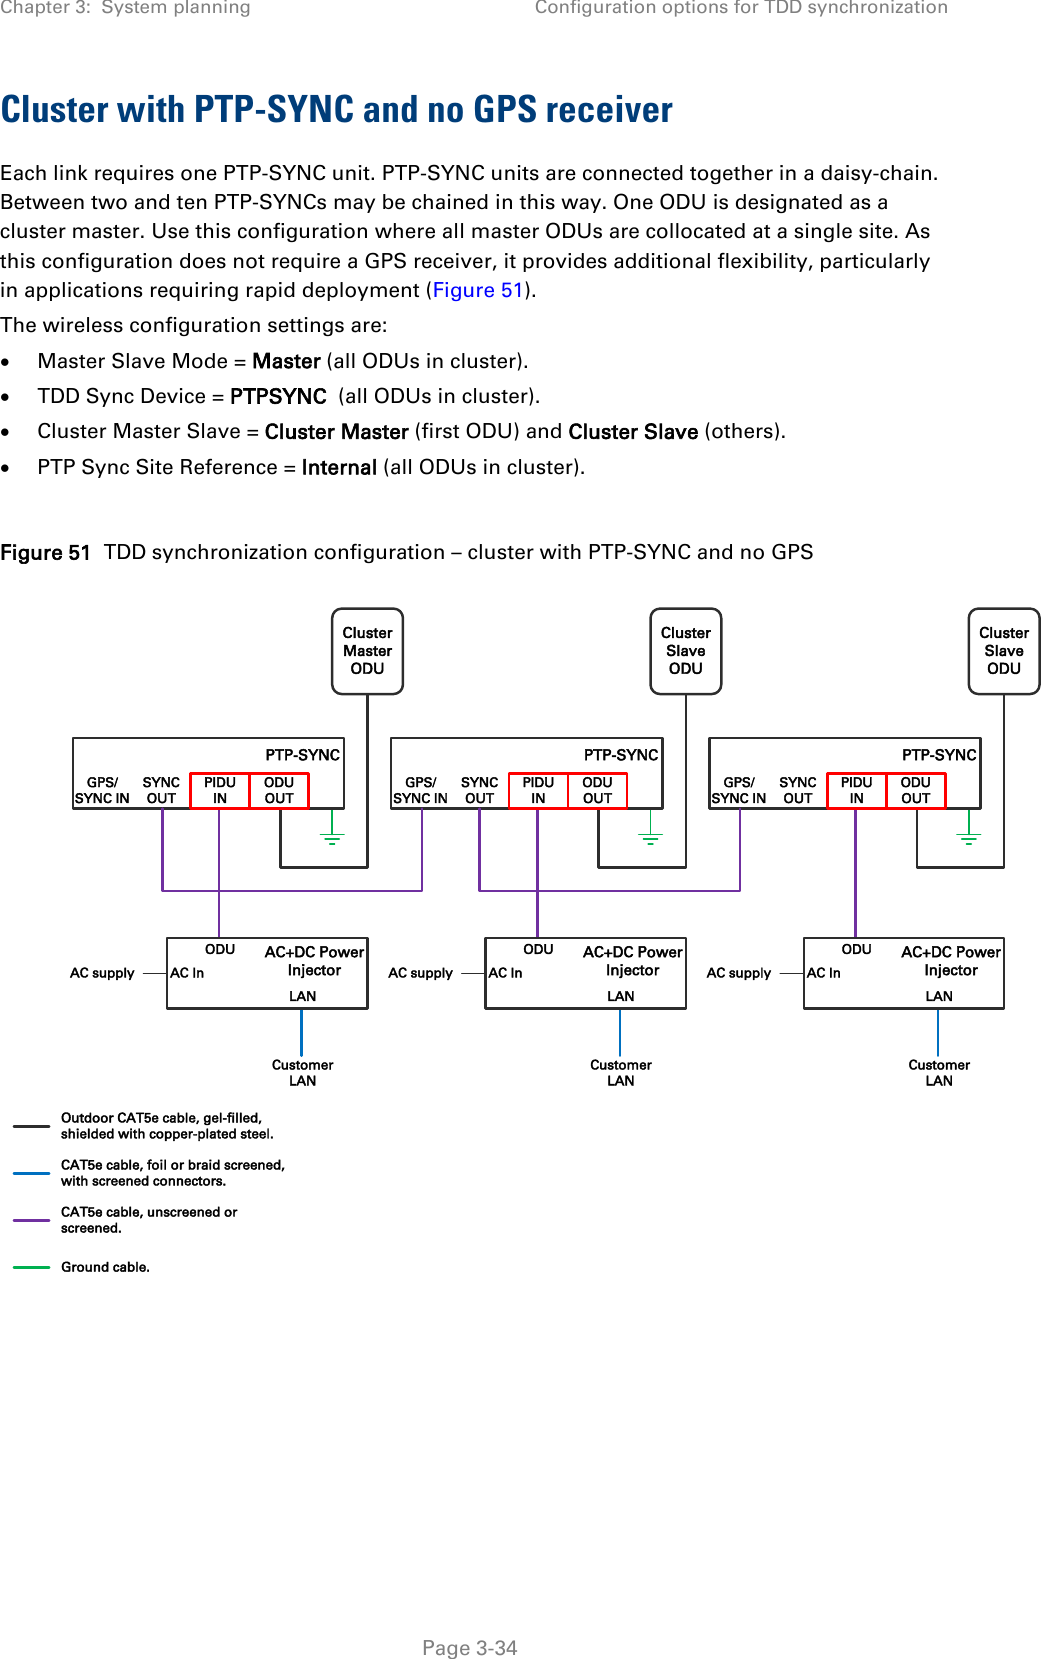 Chapter 3:  System planning Configuration options for TDD synchronization  Cluster with PTP-SYNC and no GPS receiver Each link requires one PTP-SYNC unit. PTP-SYNC units are connected together in a daisy-chain. Between two and ten PTP-SYNCs may be chained in this way. One ODU is designated as a cluster master. Use this configuration where all master ODUs are collocated at a single site. As this configuration does not require a GPS receiver, it provides additional flexibility, particularly in applications requiring rapid deployment (Figure 51). The wireless configuration settings are: • Master Slave Mode = Master (all ODUs in cluster). • TDD Sync Device = PTPSYNC  (all ODUs in cluster). • Cluster Master Slave = Cluster Master (first ODU) and Cluster Slave (others). • PTP Sync Site Reference = Internal (all ODUs in cluster).  Figure 51  TDD synchronization configuration – cluster with PTP-SYNC and no GPS     ClusterMasterODUPTP-SYNCGPS/SYNC INSYNCOUTPIDUINODUOUTODULANAC+DC PowerInjectorAC InCustomerLANAC supplyOutdoor CAT5e cable, gel-filled, shielded with copper-plated steel.CAT5e cable, foil or braid screened, with screened connectors.CAT5e cable, unscreened or screened.Ground cable.ClusterSlaveODUPTP-SYNCGPS/SYNC INSYNCOUTPIDUINODUOUTODULANAC+DC PowerInjectorAC InCustomerLANAC supplyClusterSlaveODUPTP-SYNCGPS/SYNC INSYNCOUTPIDUINODUOUTODULANAC+DC PowerInjectorAC InCustomerLANAC supply Page 3-34 